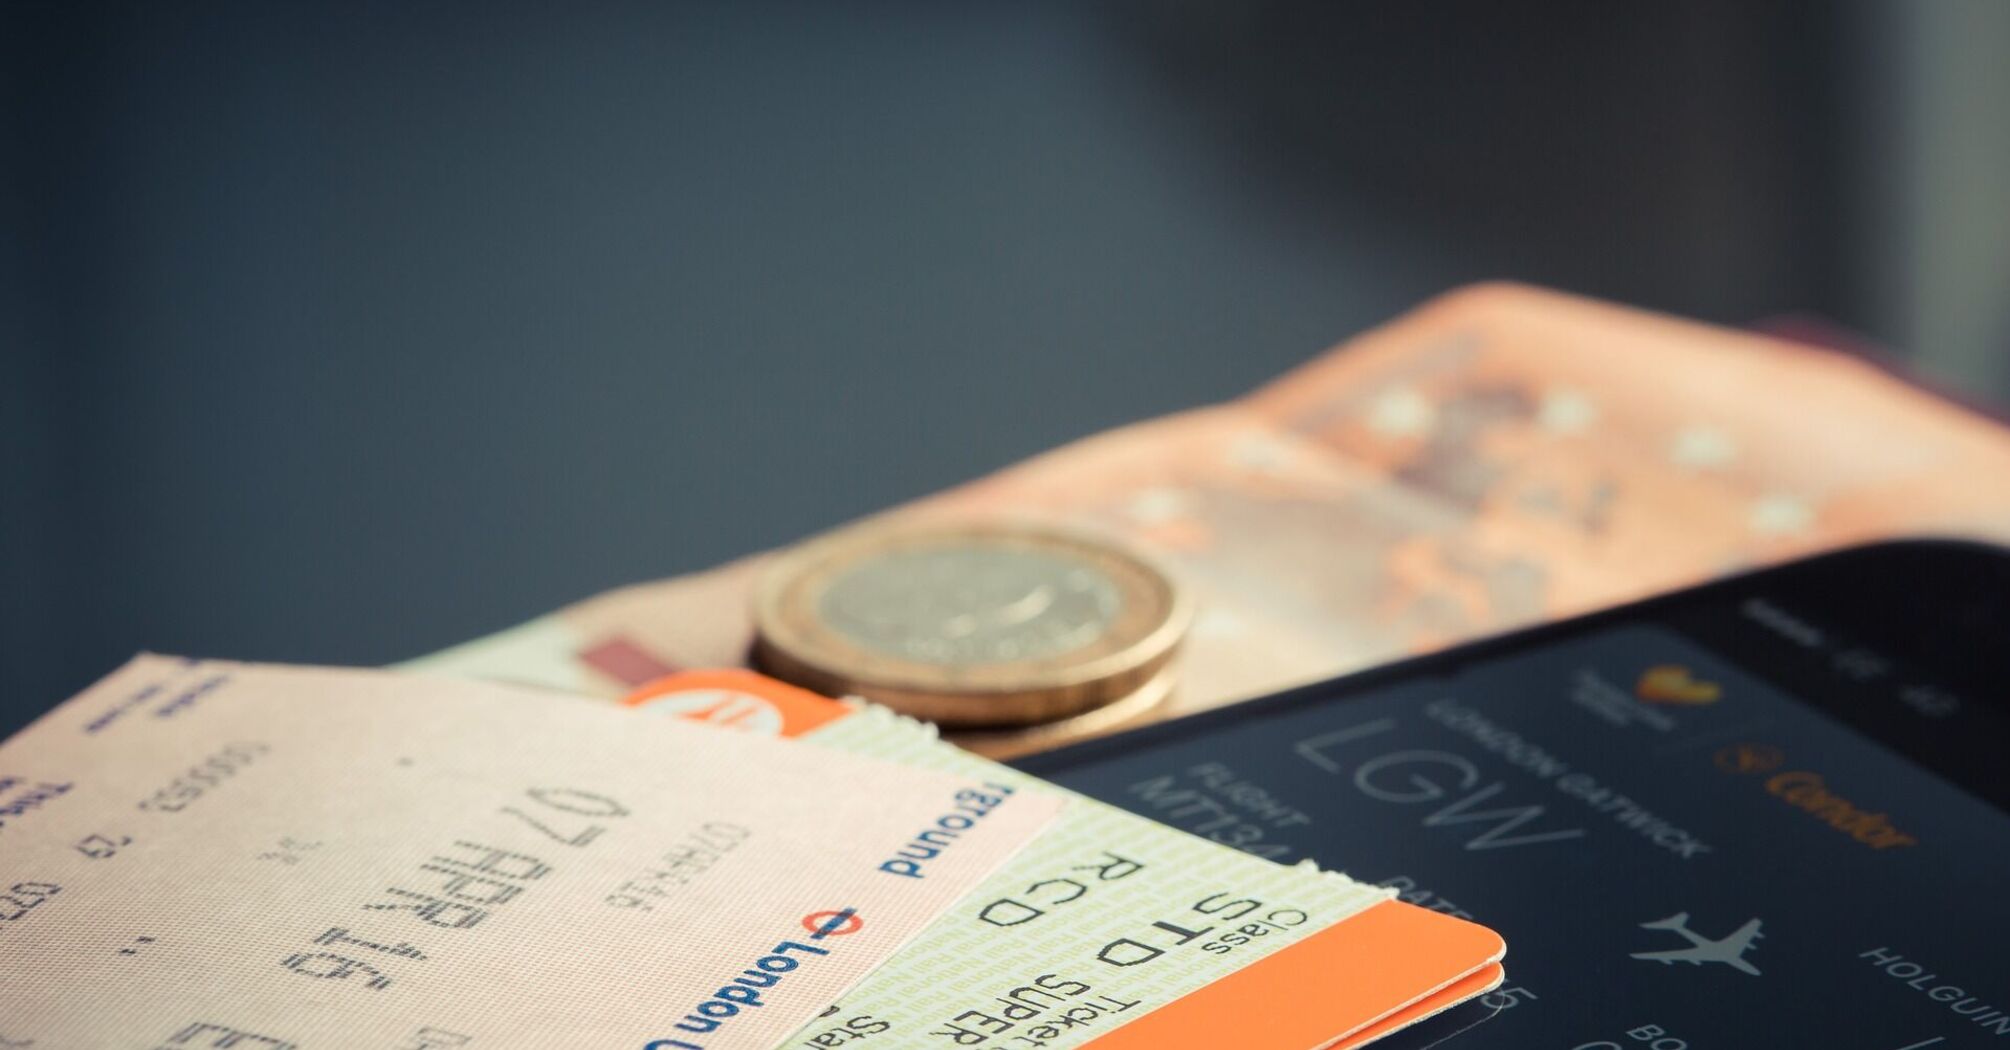 How to avoid fraud when booking airline tickets during the holiday season: Tips from INTERPOL